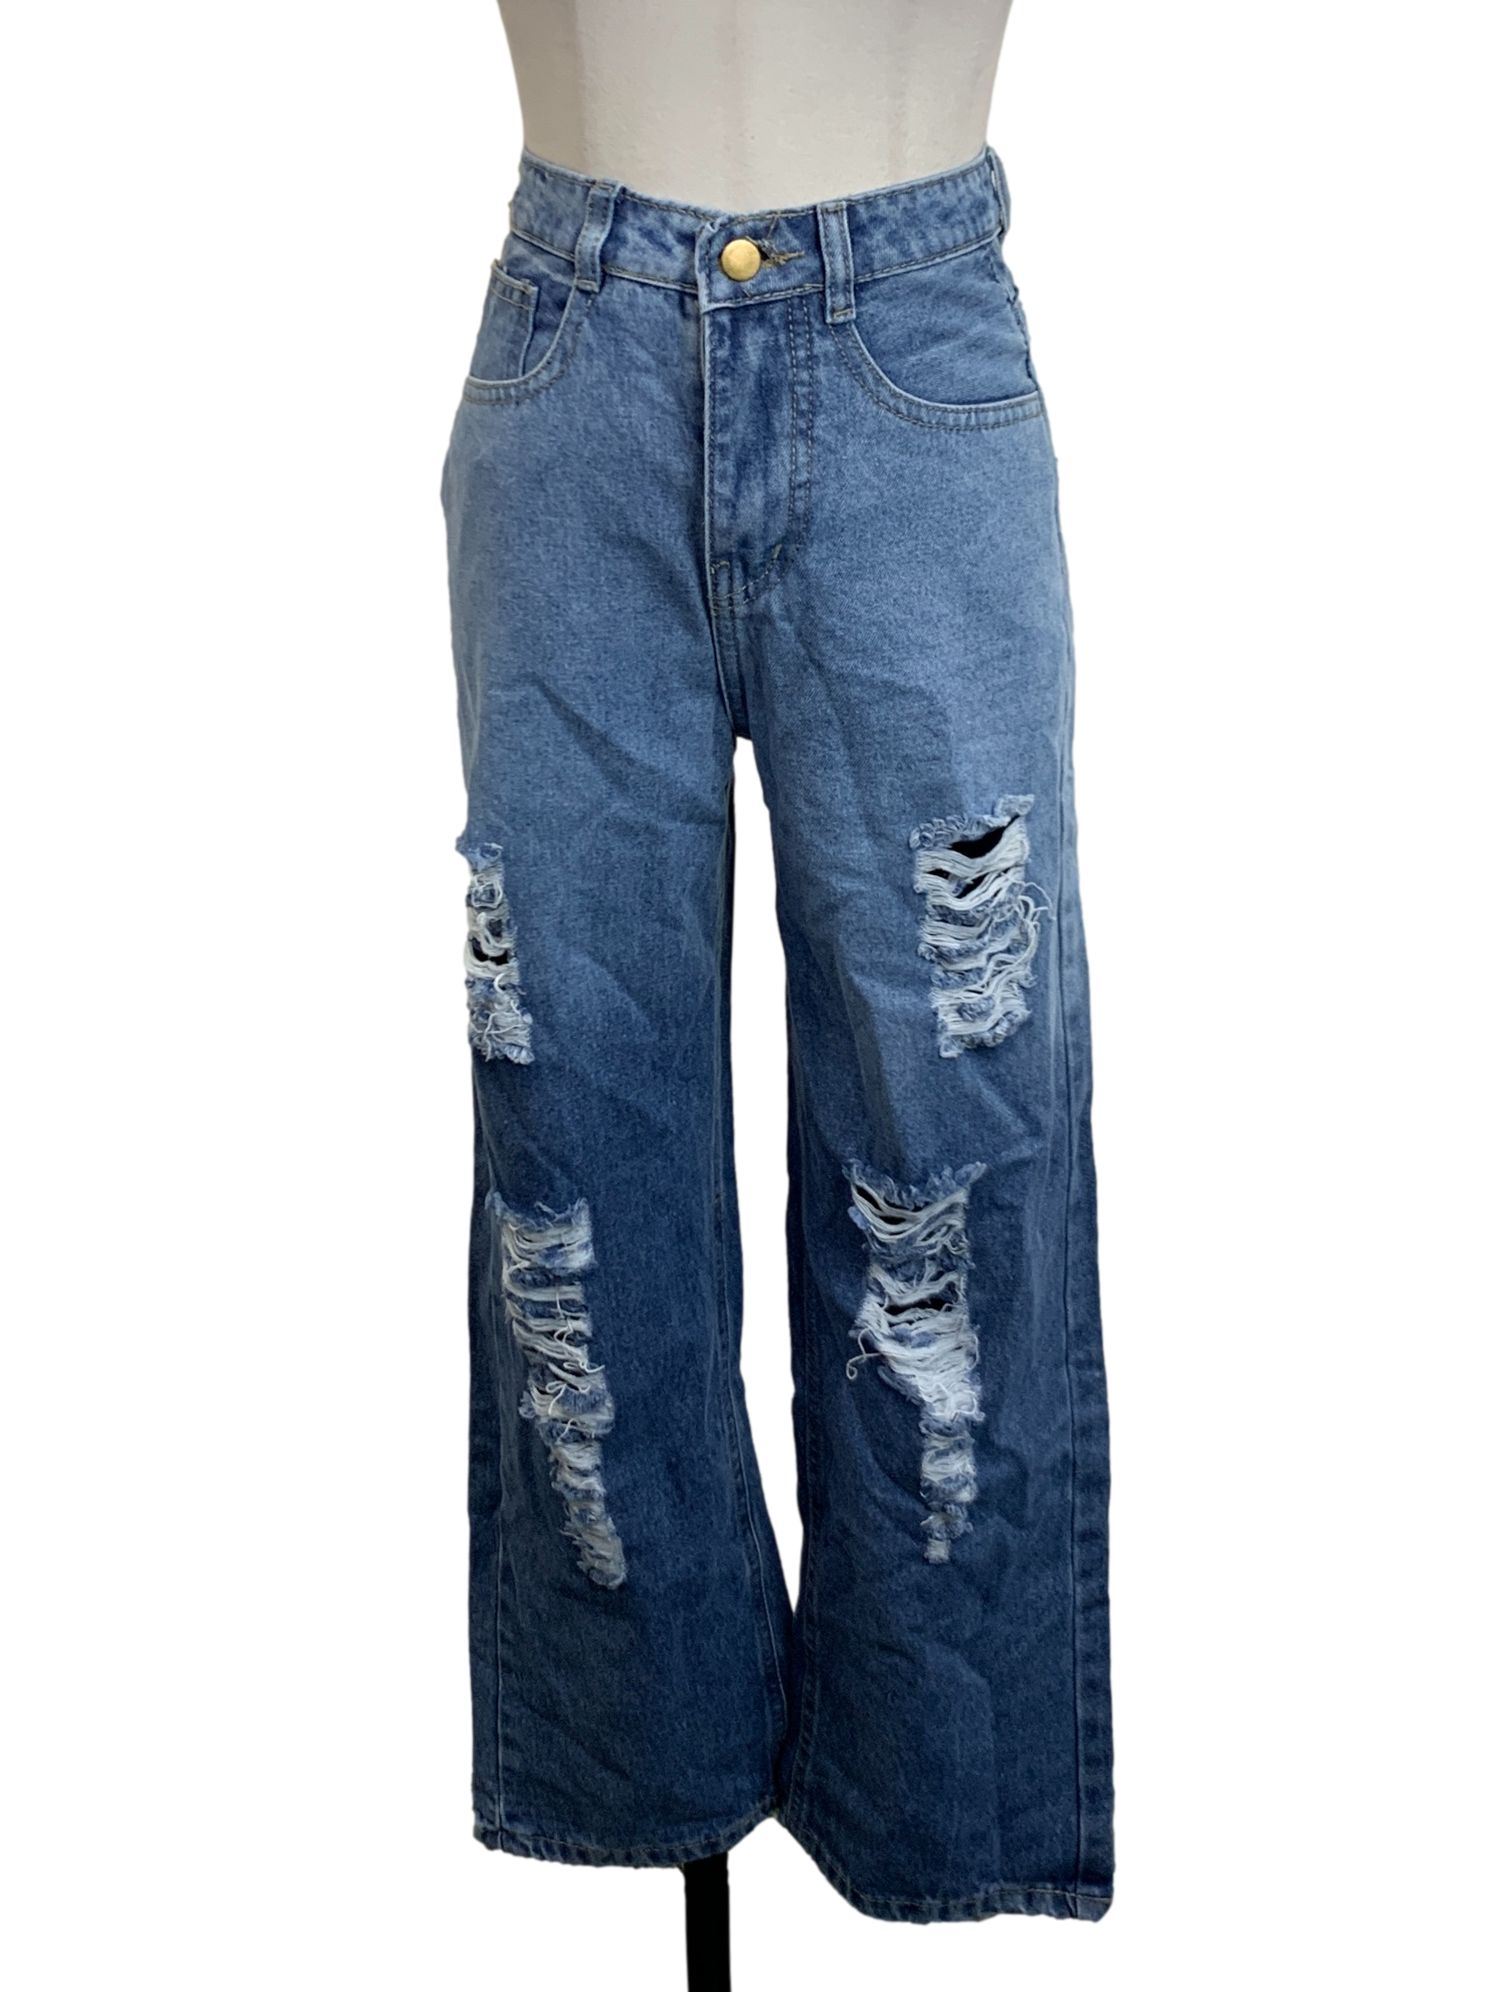 Demin Blue Ripped Jeans